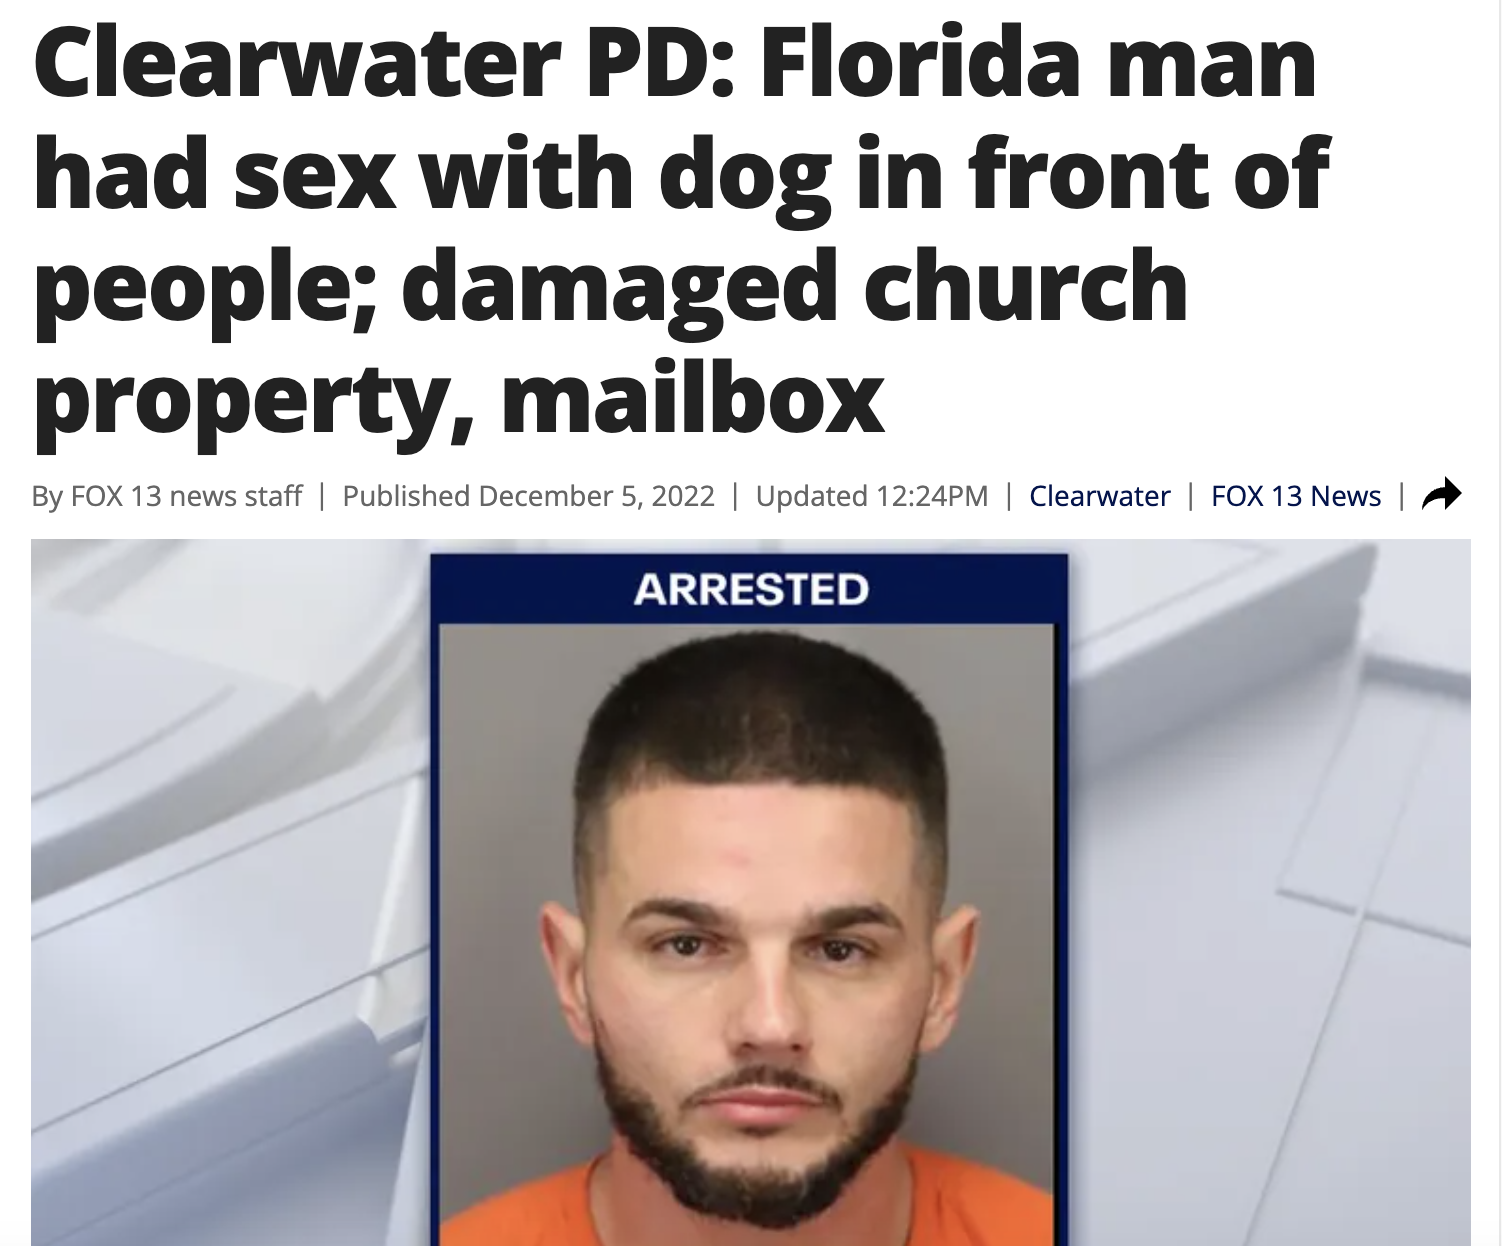 Best of Florida Man 2022 - head - Clearwater Pd Florida man had sex with dog in front of people; damaged church property, mailbox By Fox 13 news staff | Published | Updated Pm | Clearwater | Fox 13 News | Arrested